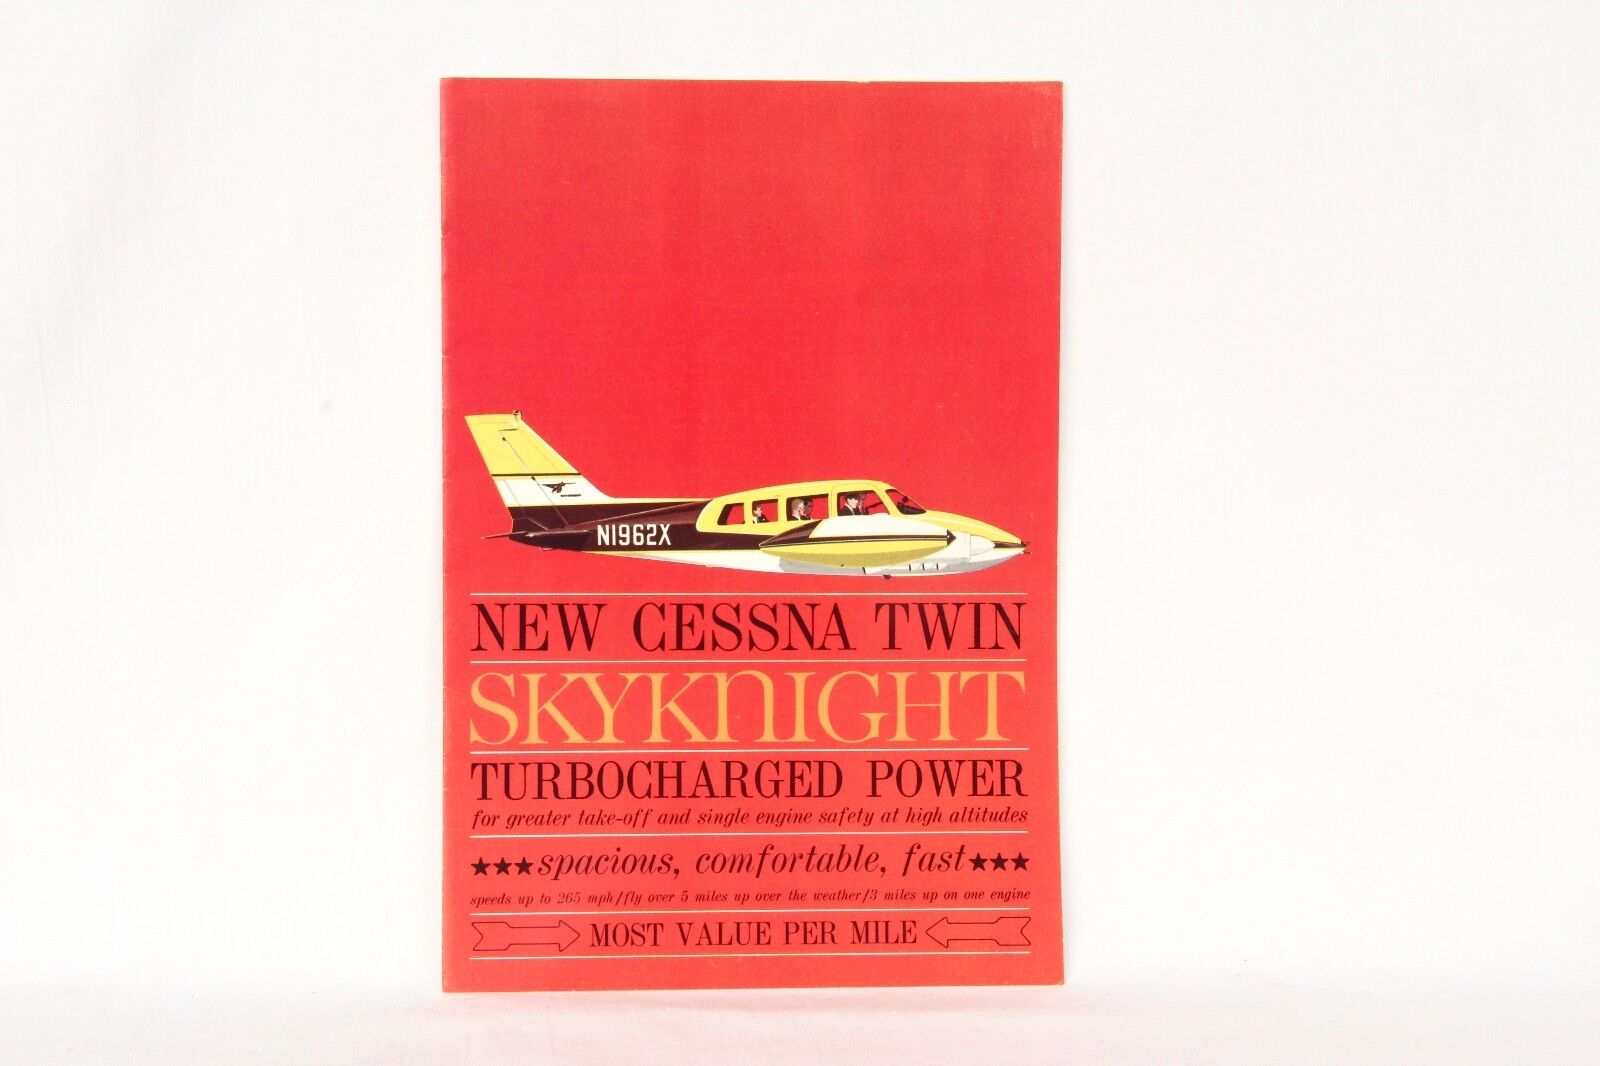 CESSNA New Skyknight Twin Turbo 1962 Factory Sales Brochure Vintage Color Gift